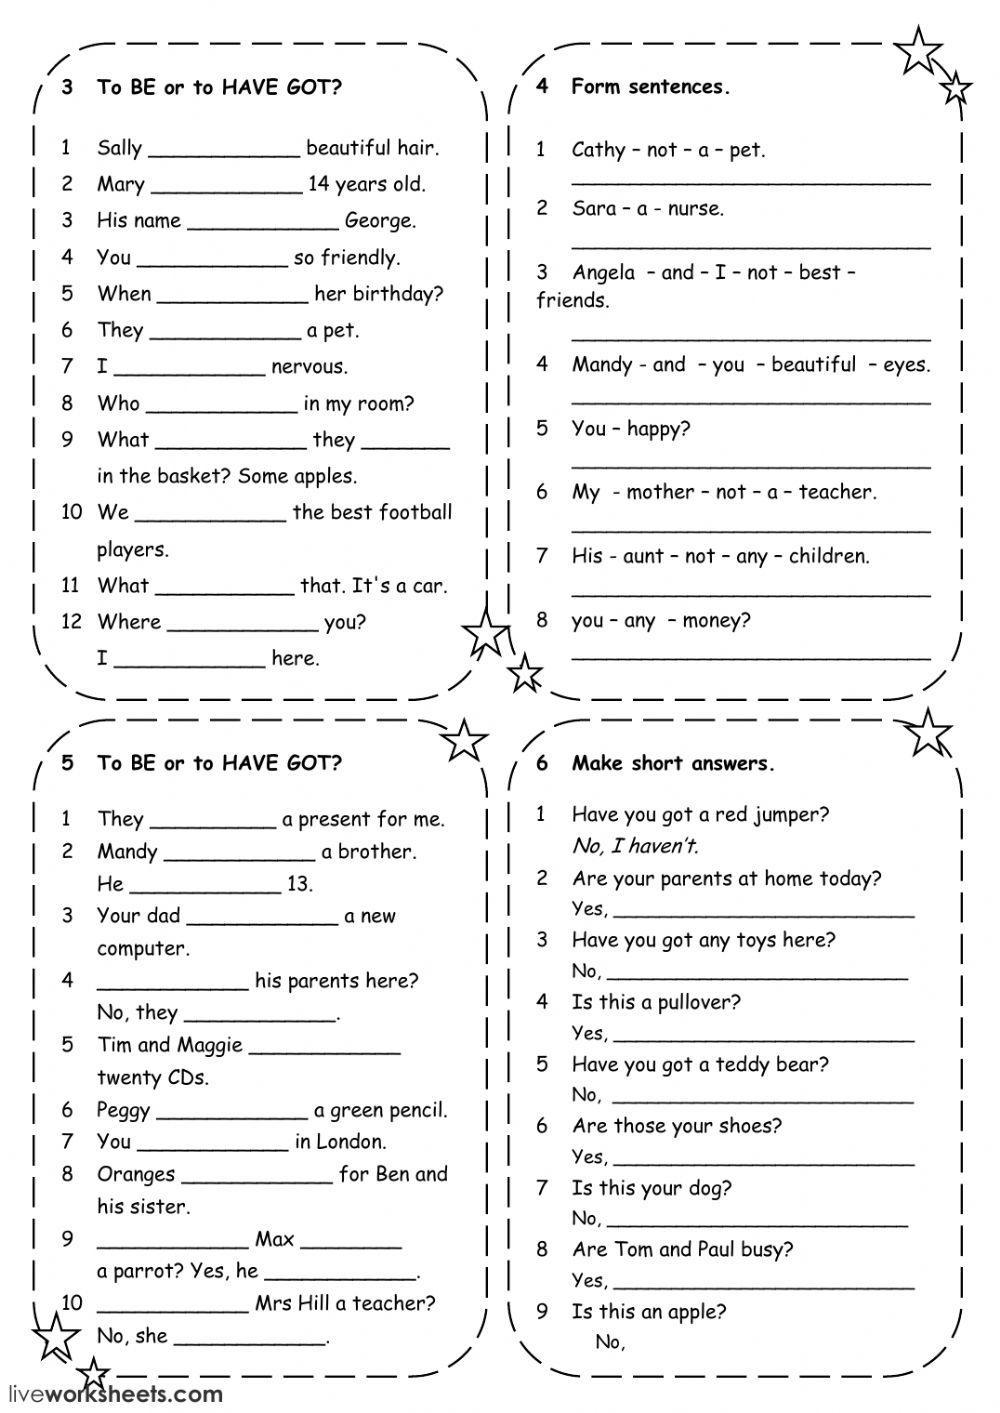 To be or to have got? worksheet | Live Worksheets